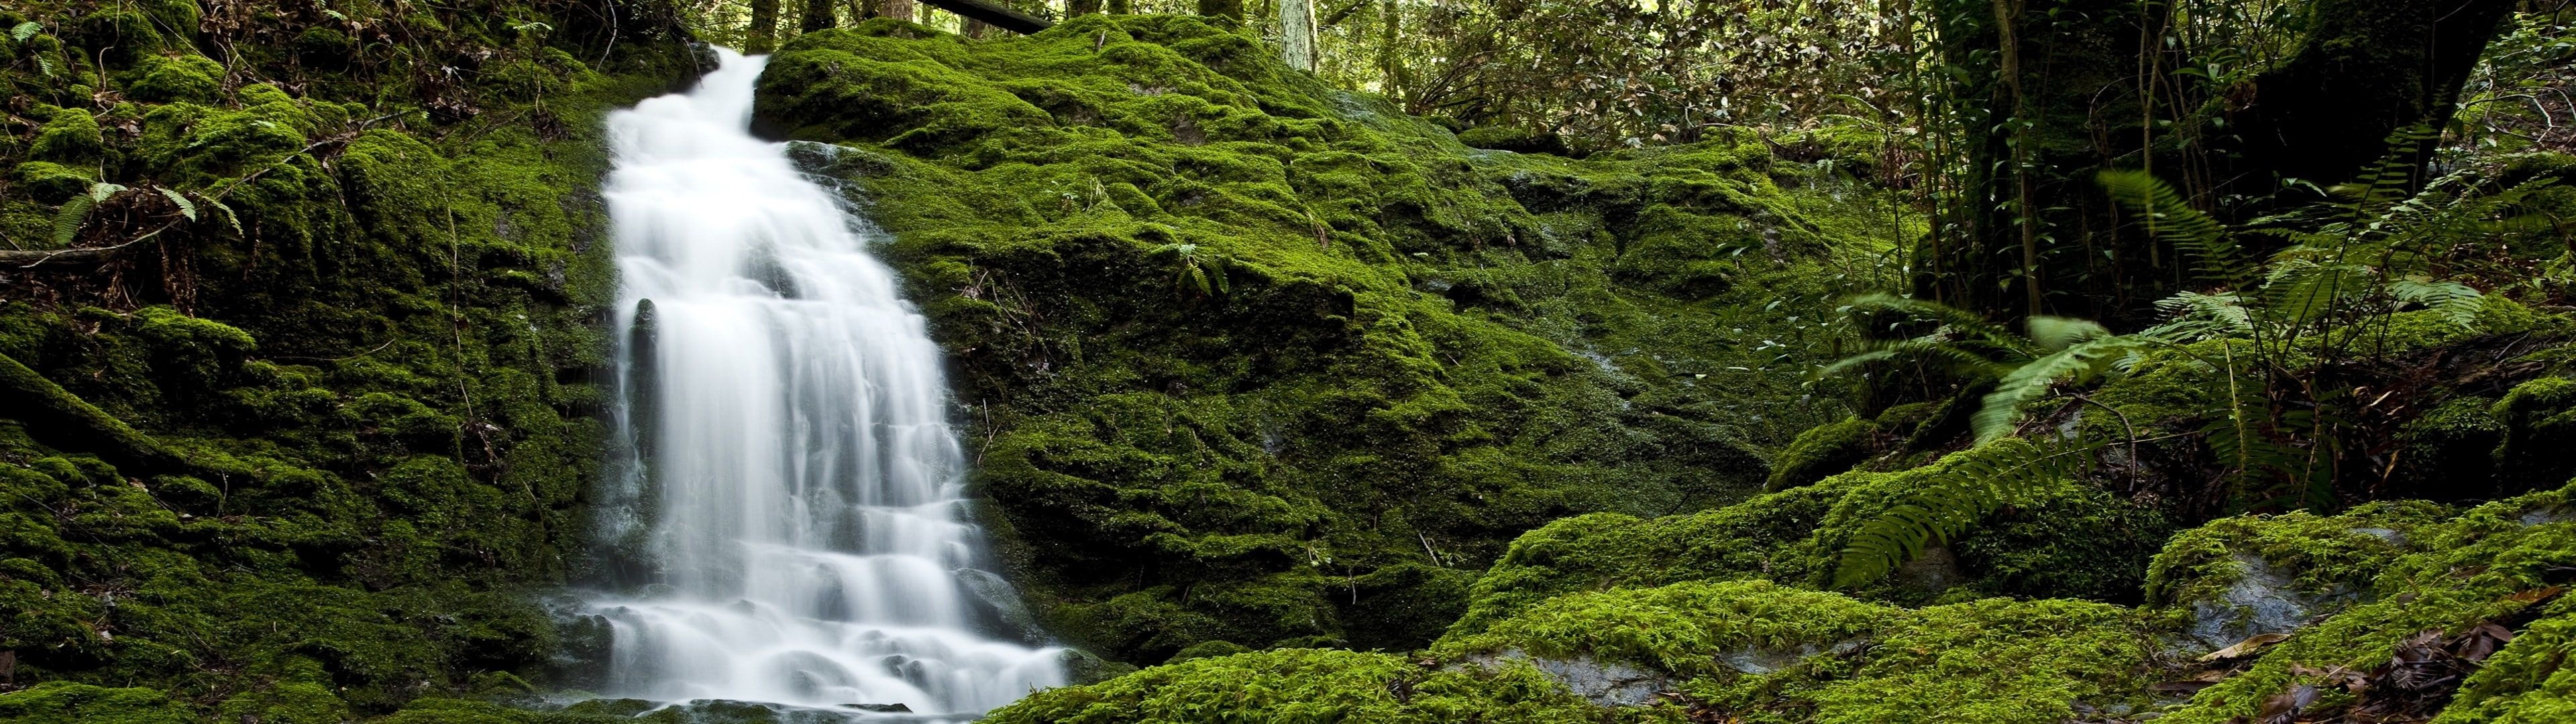 Landscape: A small waterfall in the nordic forest full of green moss, Canada. 3840x1080 Dual Screen Background.